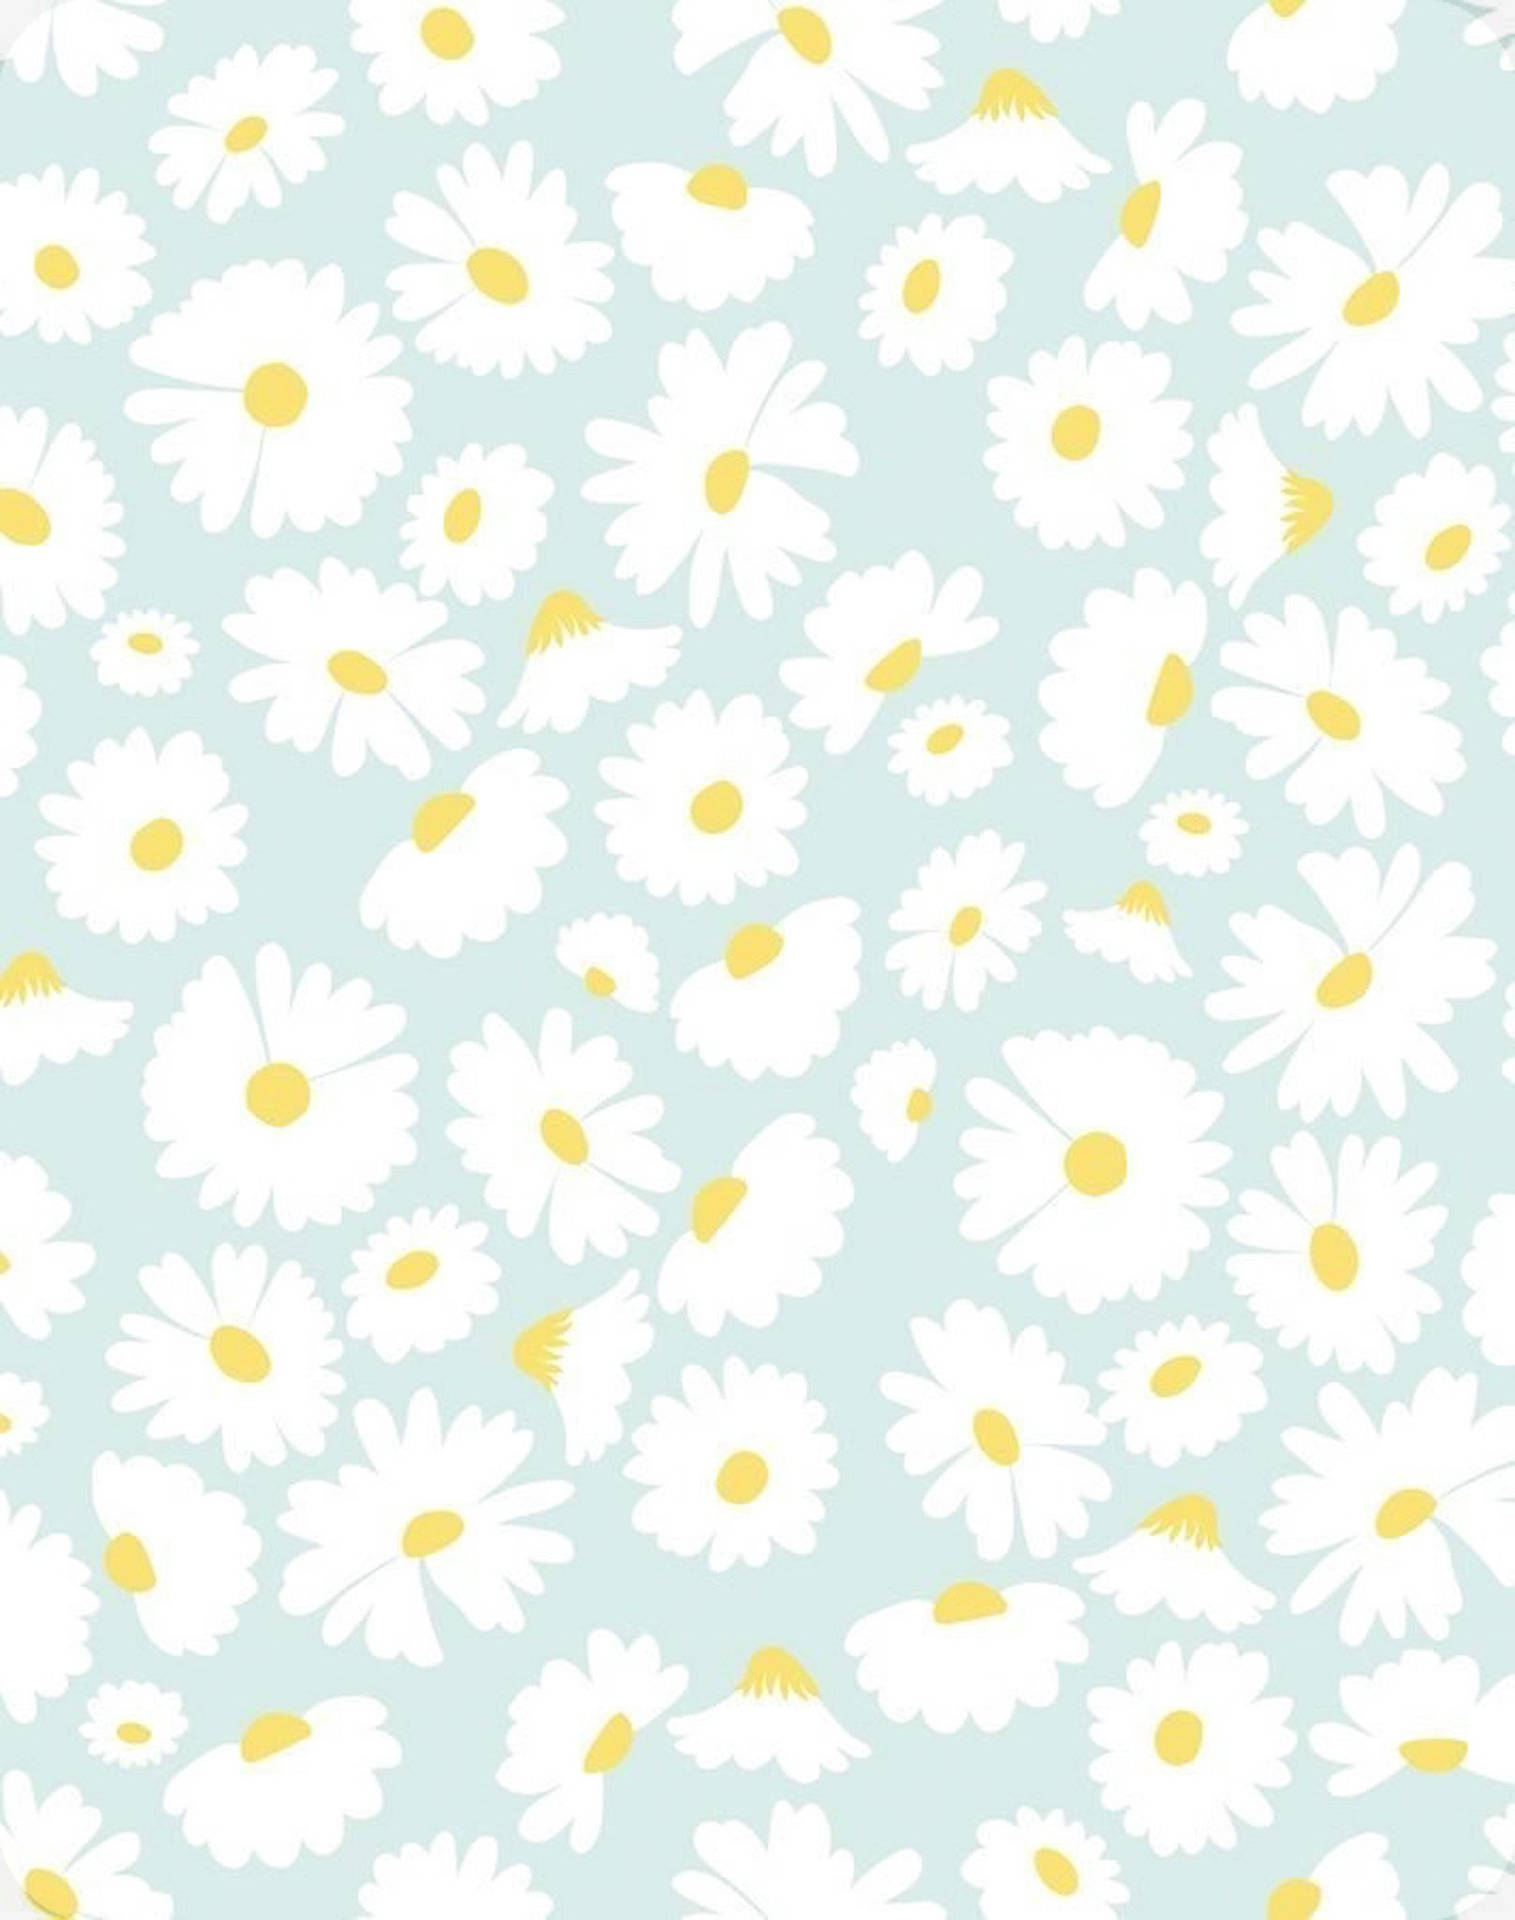 Brighten Up Your Day with This Cute Spring Phone Wallpaper